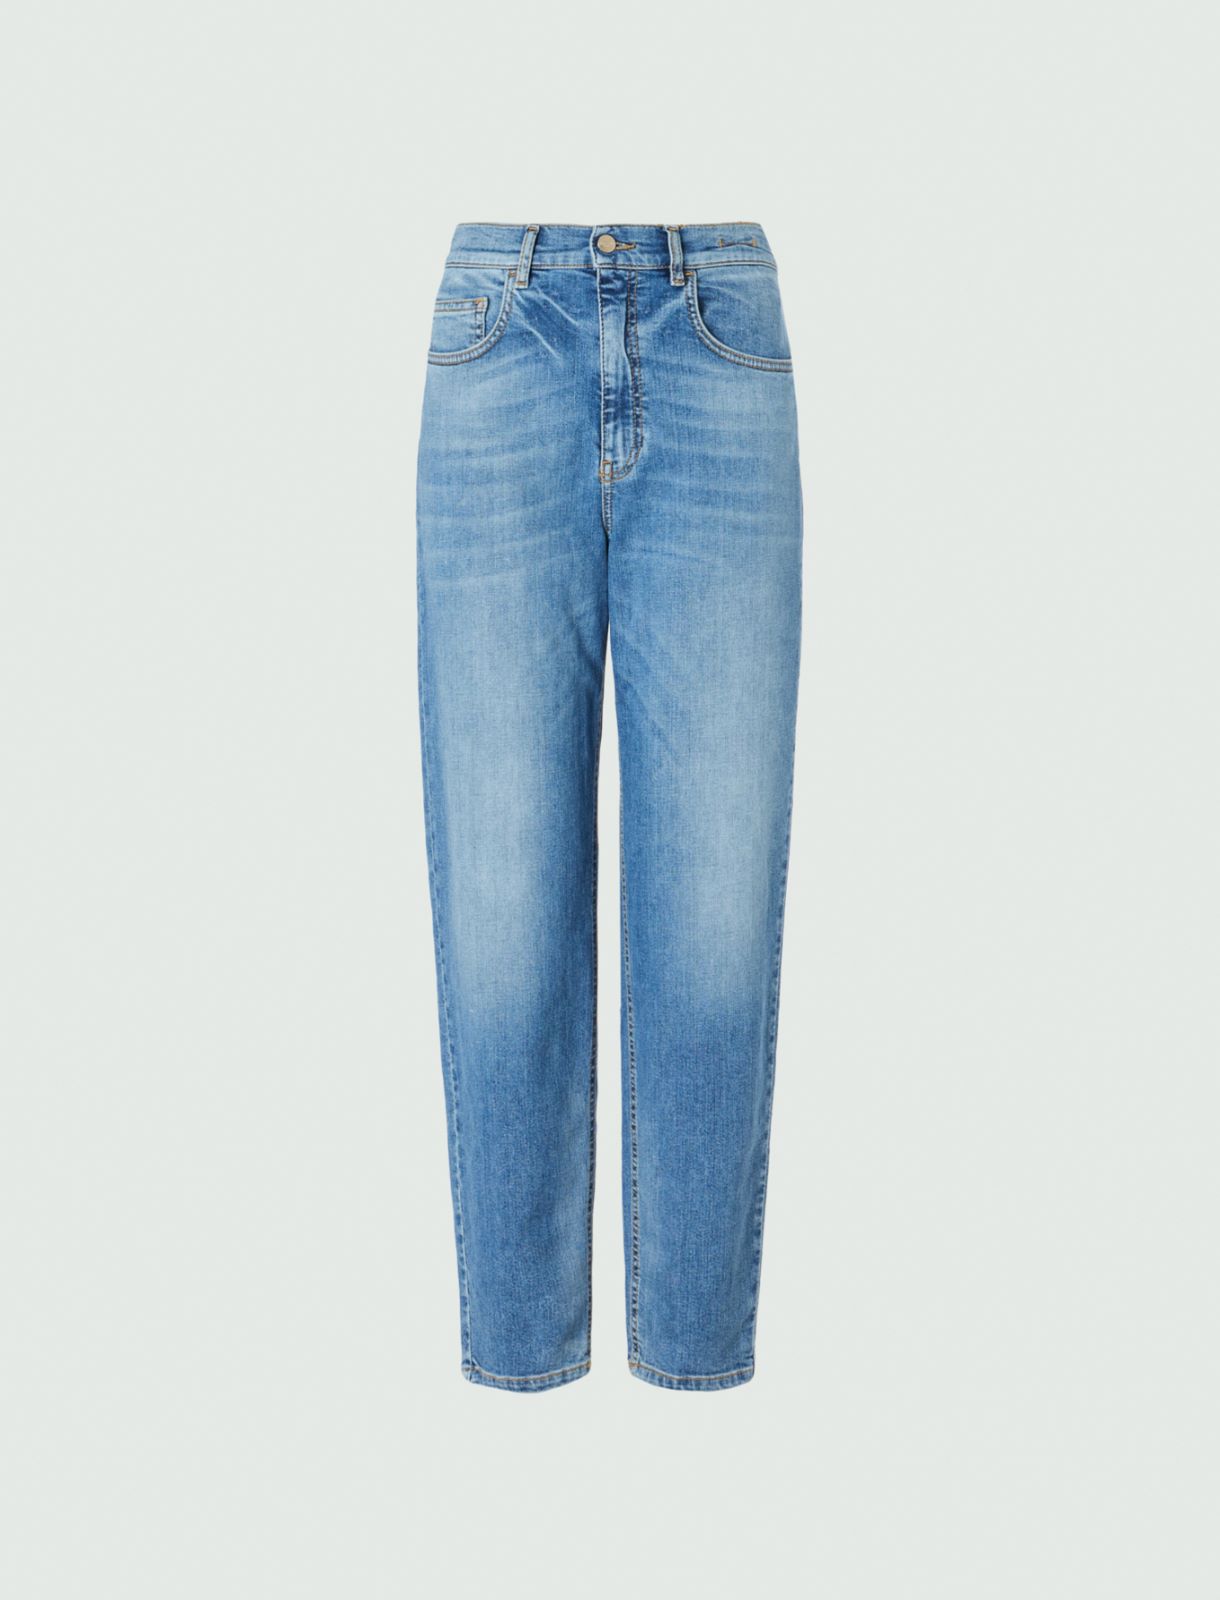 Mom-fit jeans - Blue jeans - Marella - 6